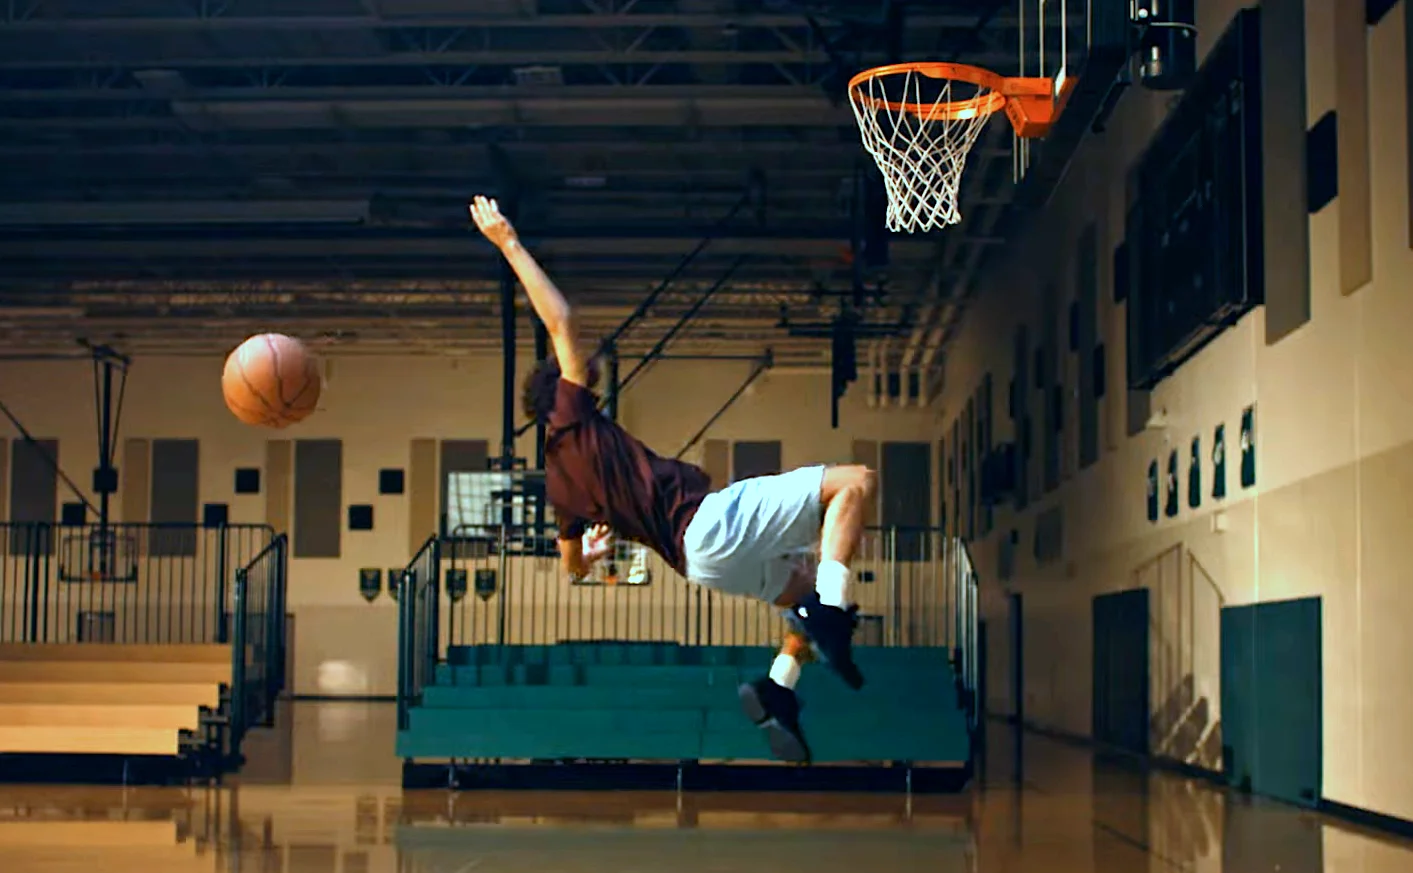 Basketball player performing an acrobatic dunk in an indoor gymnasium.